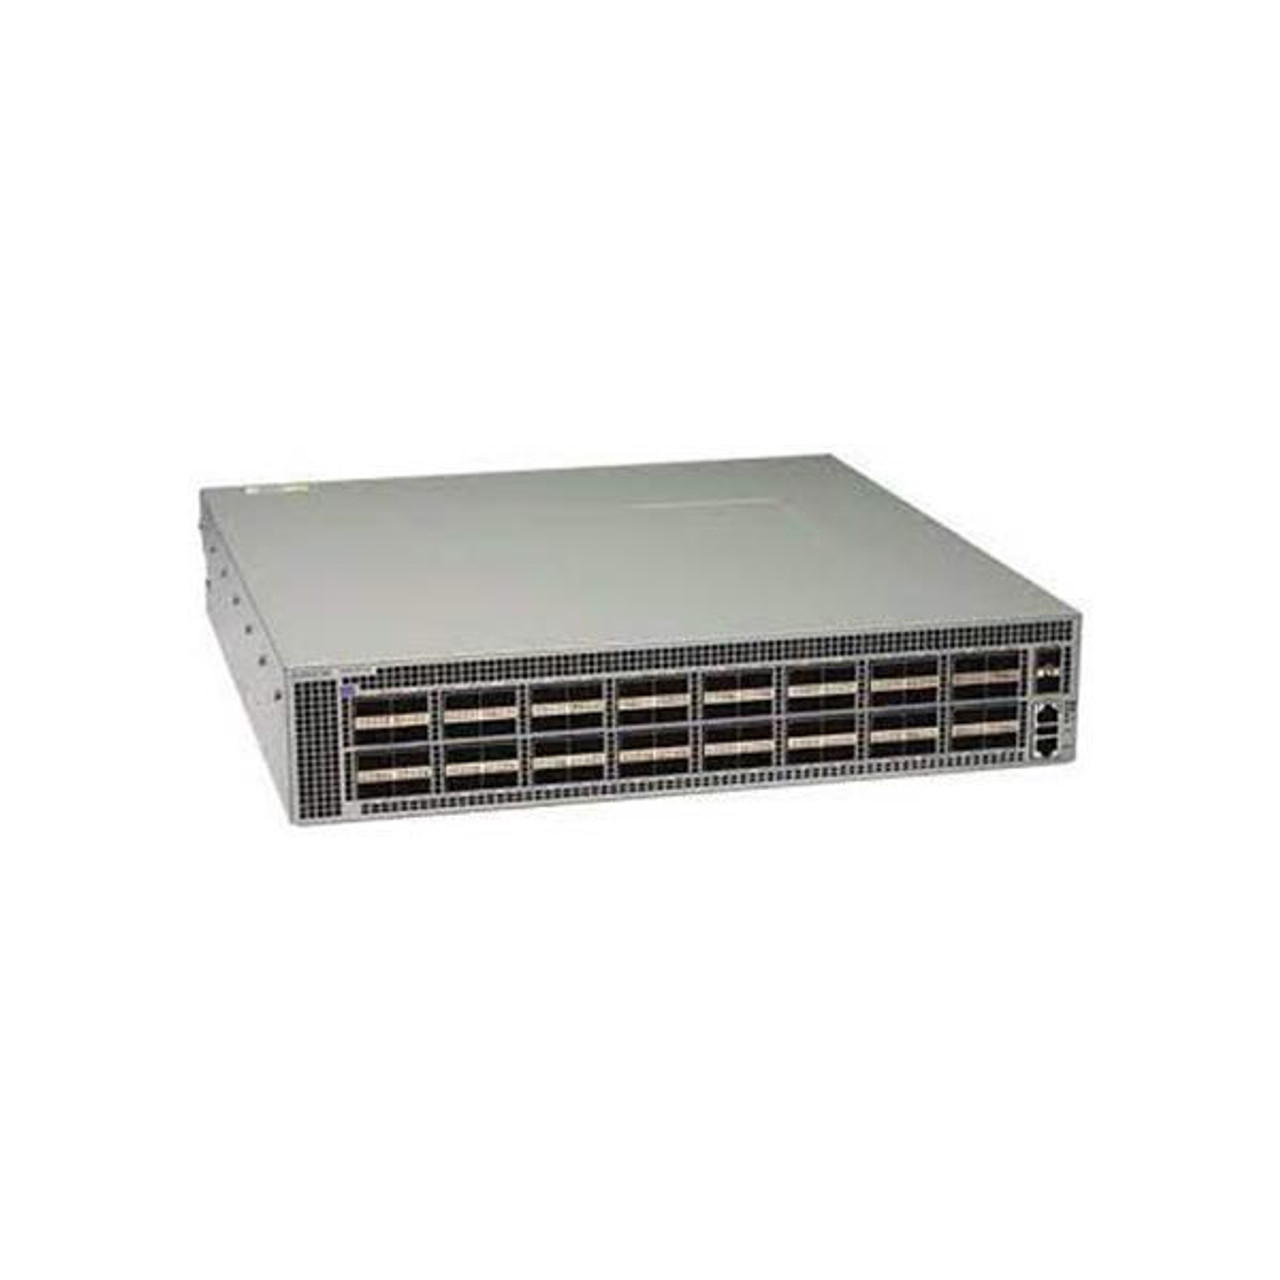 DCS-7260CX3-64-F Arista 7260X3 64-Ports 100GbE QSFP front-to-rear air Switch with 2x SFP+ Ports (Refurbished)